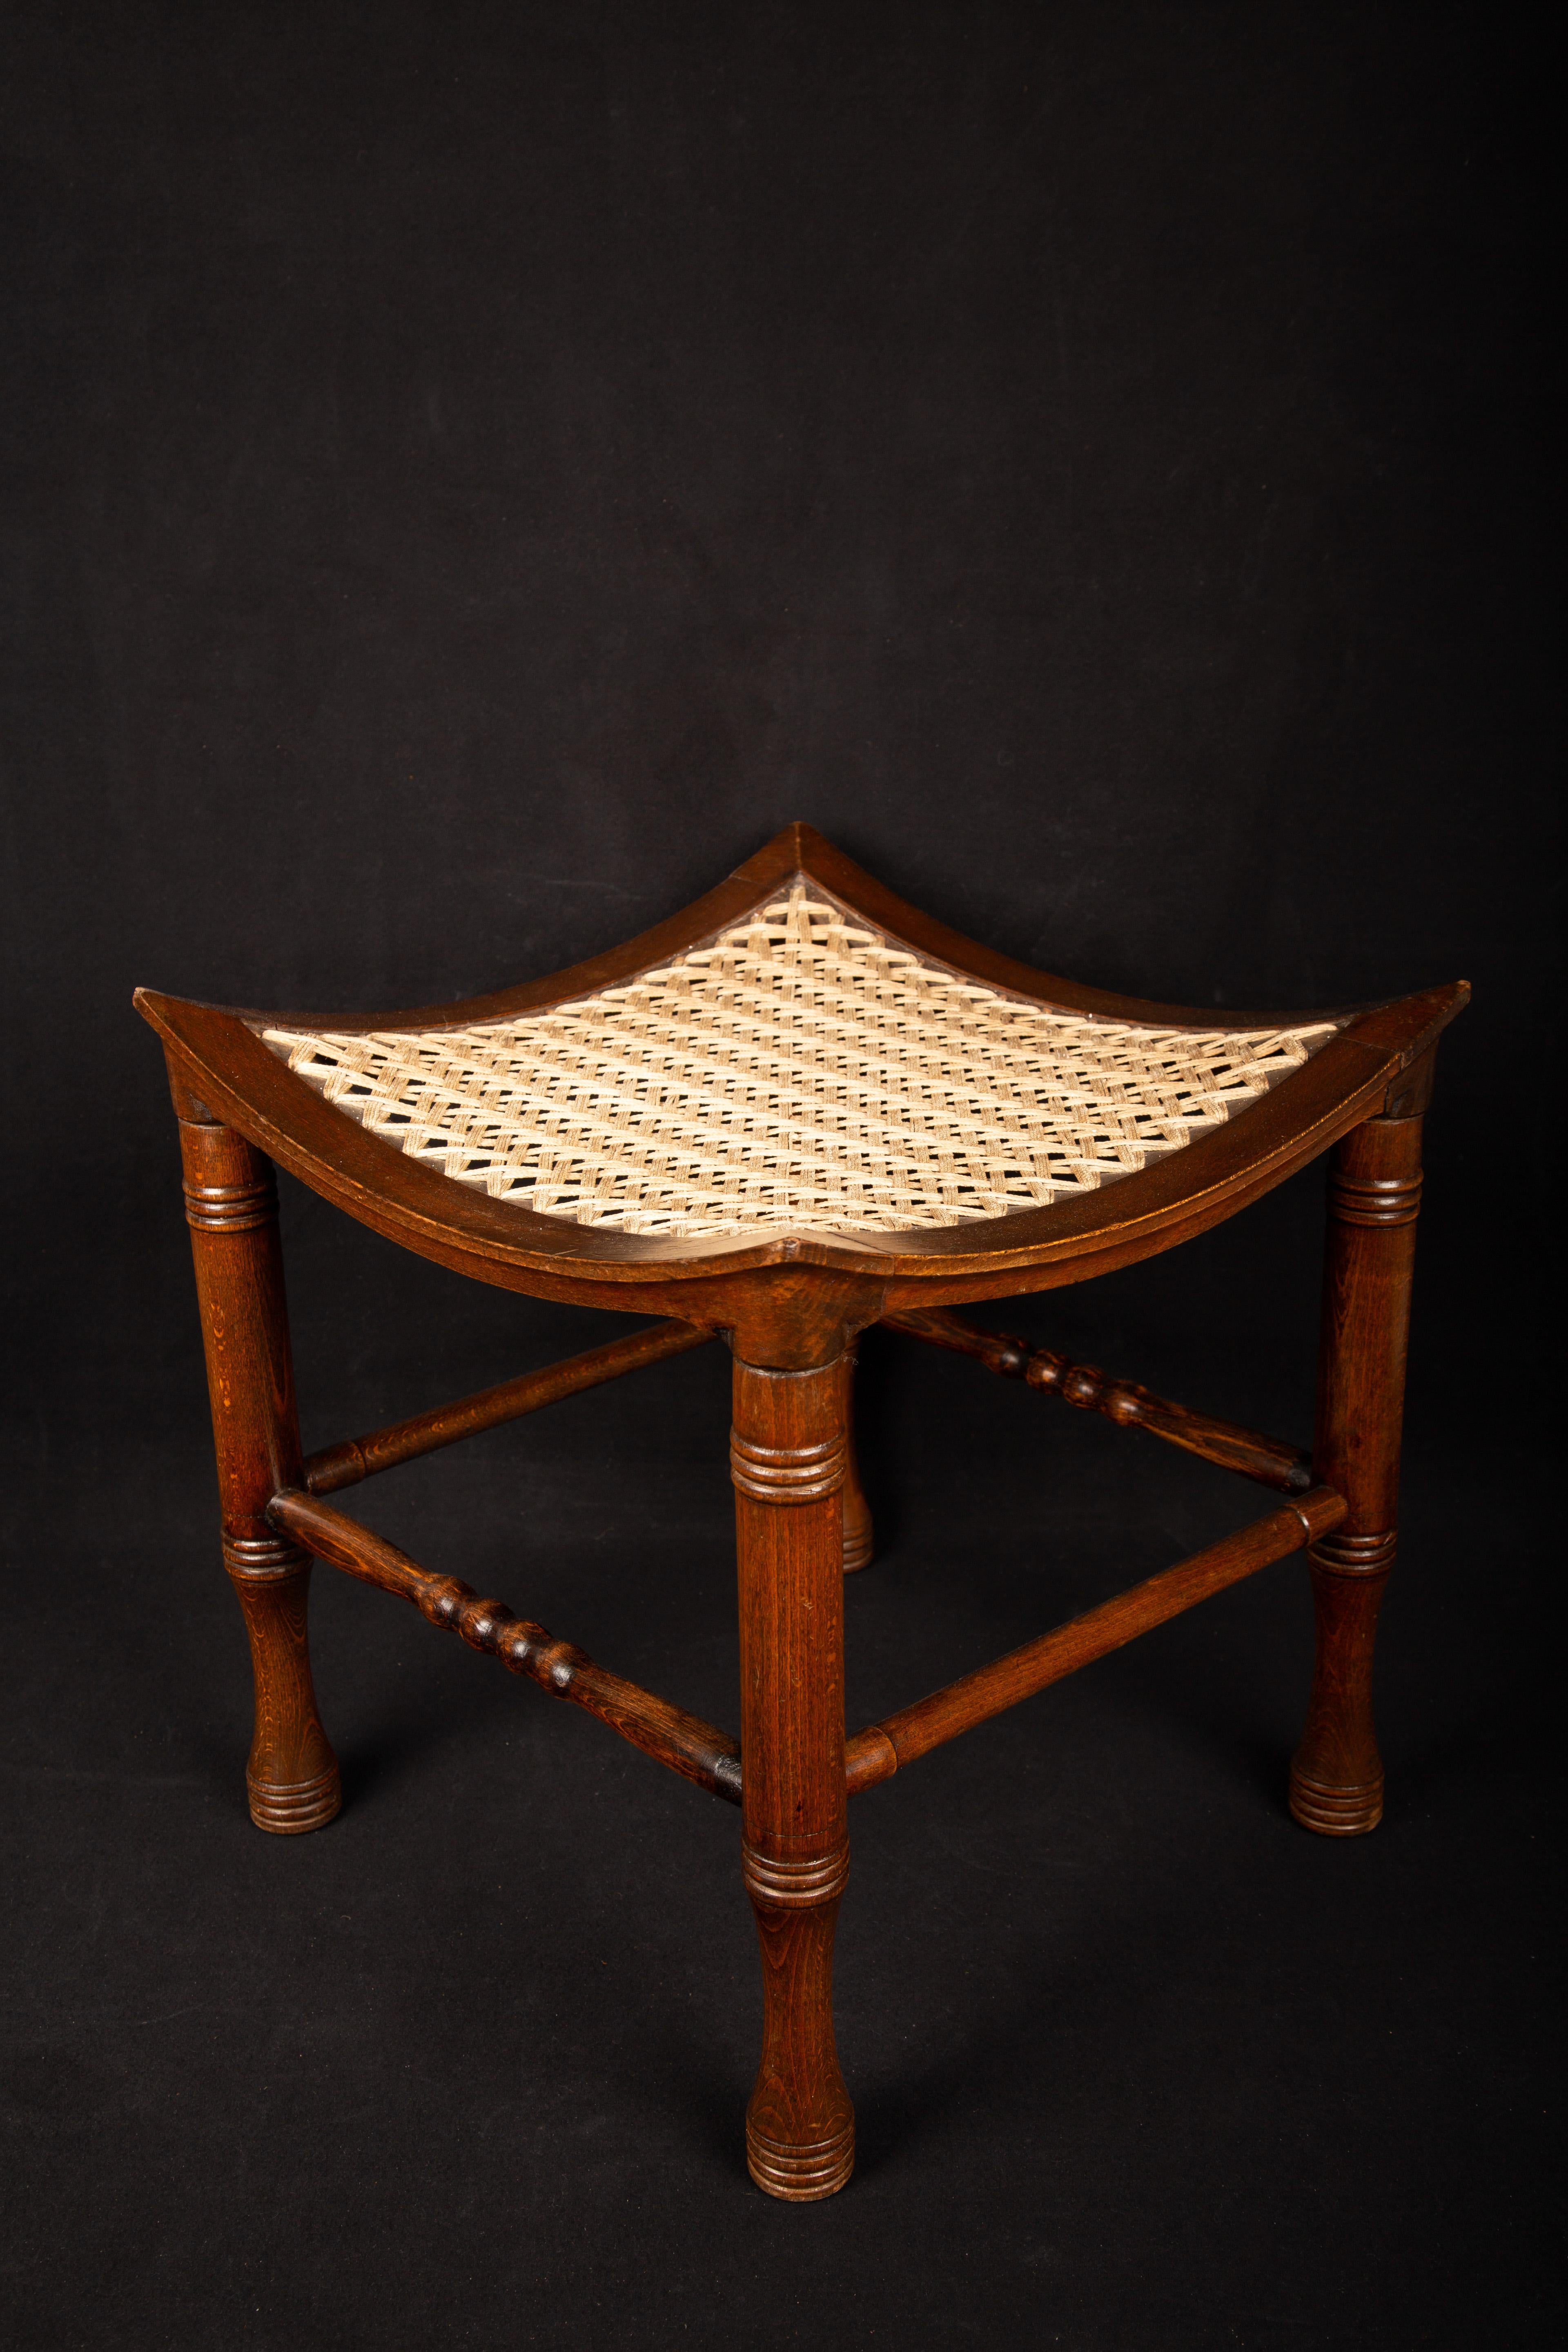 Wood and cord Thebes stool, 19th C

Measures: 14.5